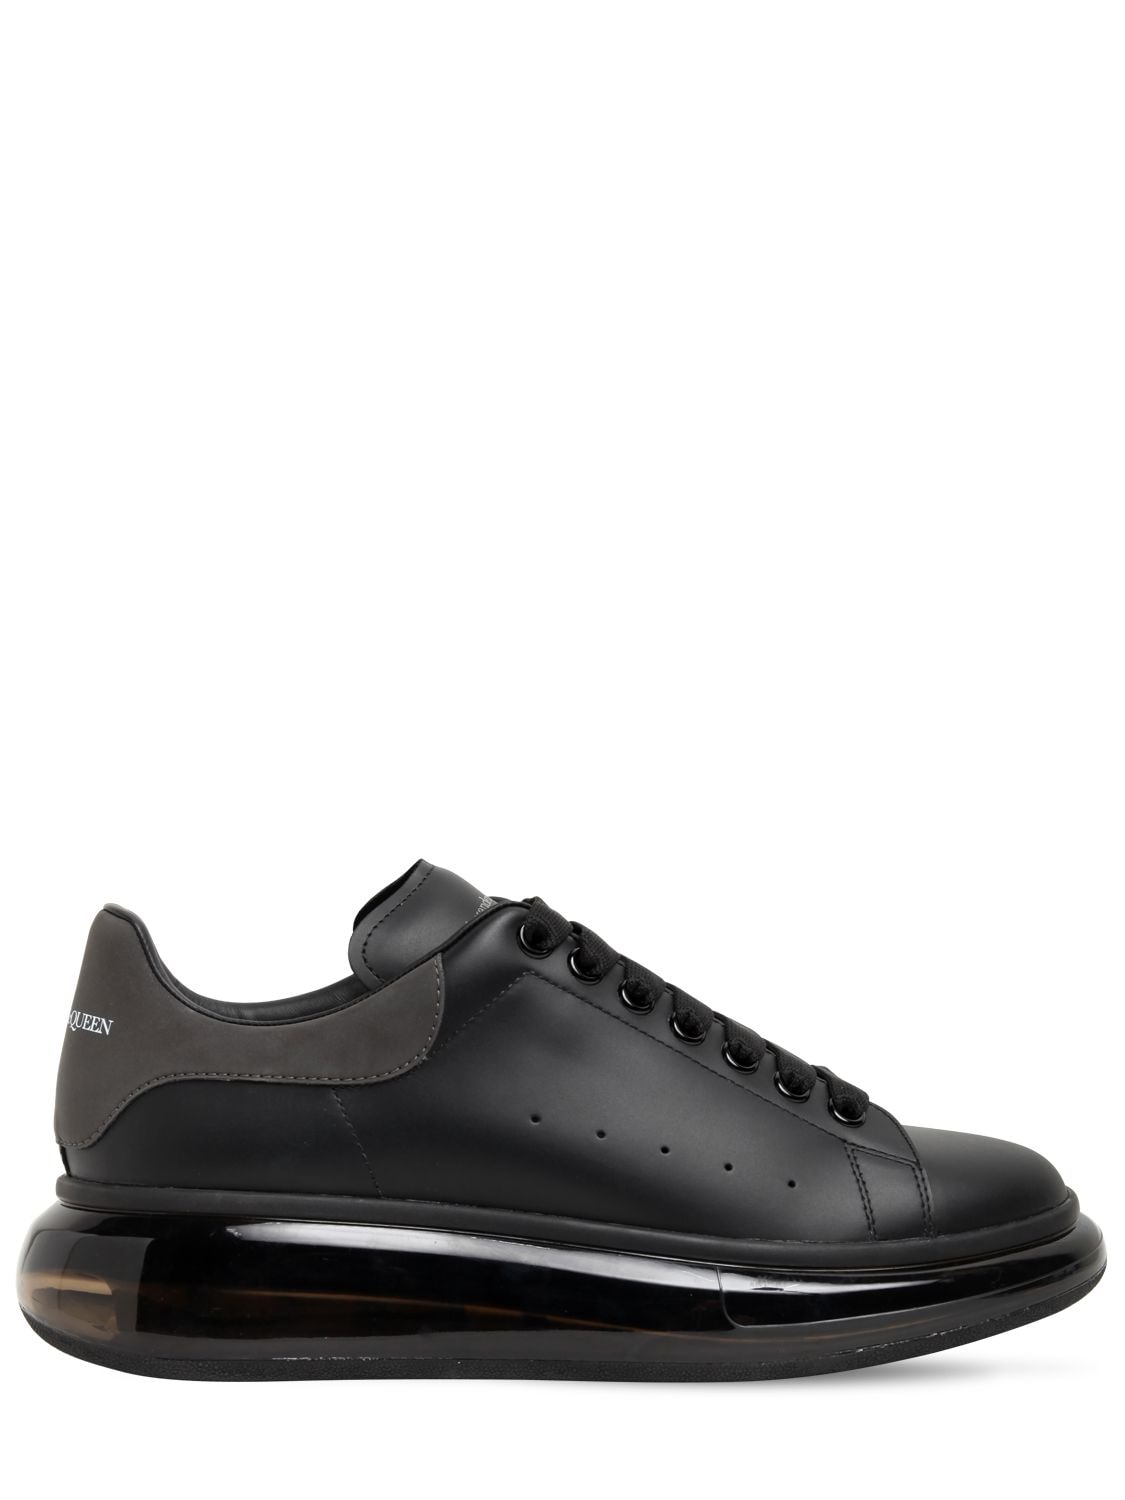 ALEXANDER MCQUEEN 45MM AIR REFLECT LEATHER SNEAKERS,72IA9U004-MTA3MW2